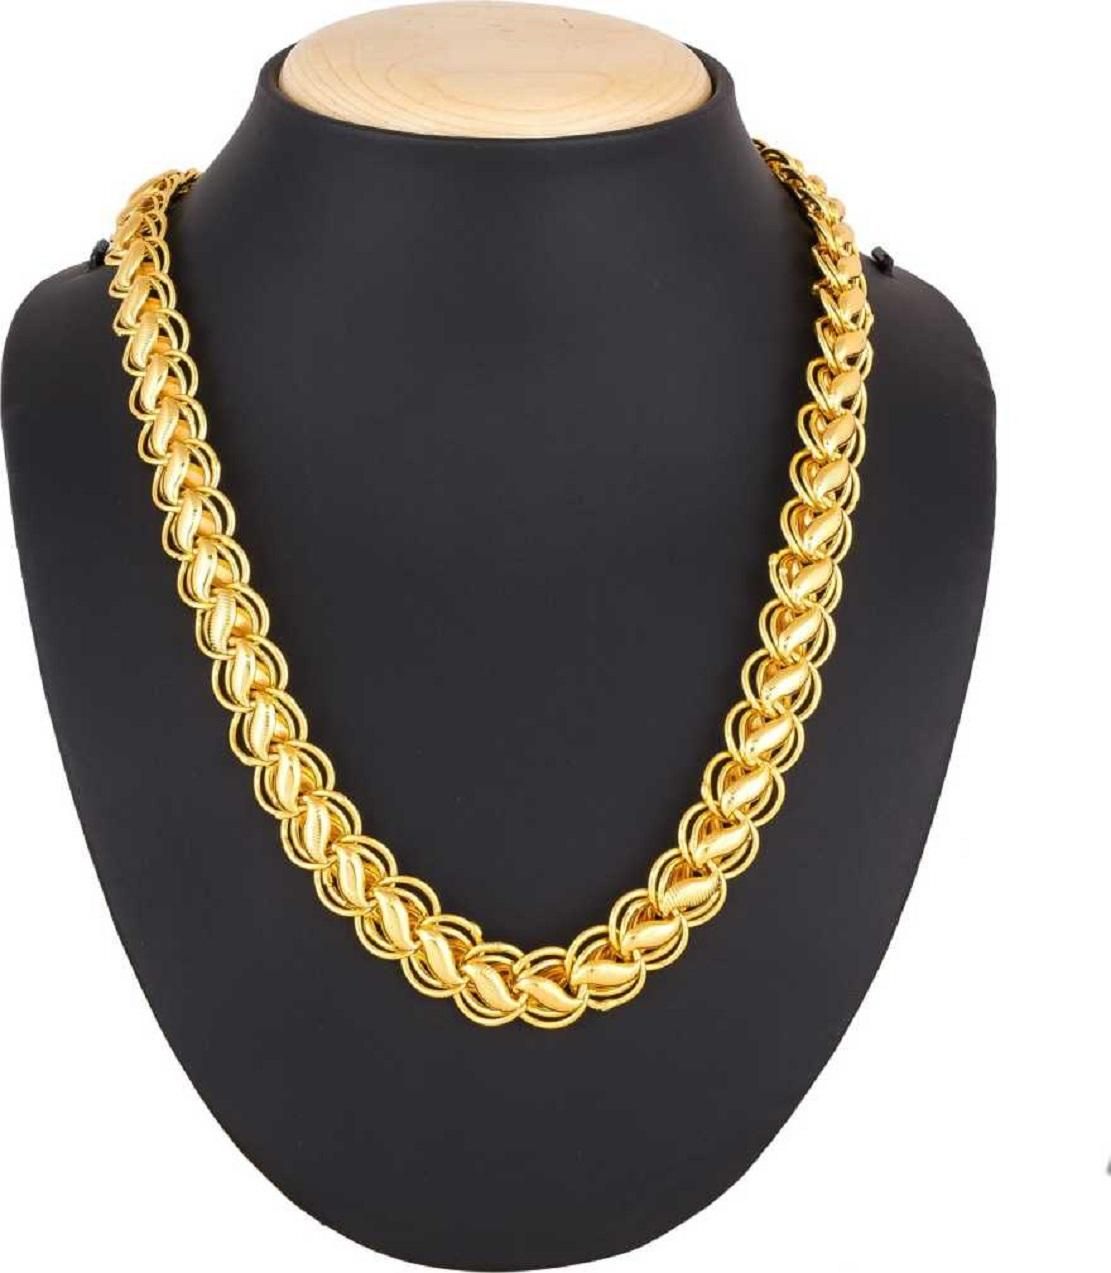 Traditional Gold Plated Chains For Men – Shopaholics